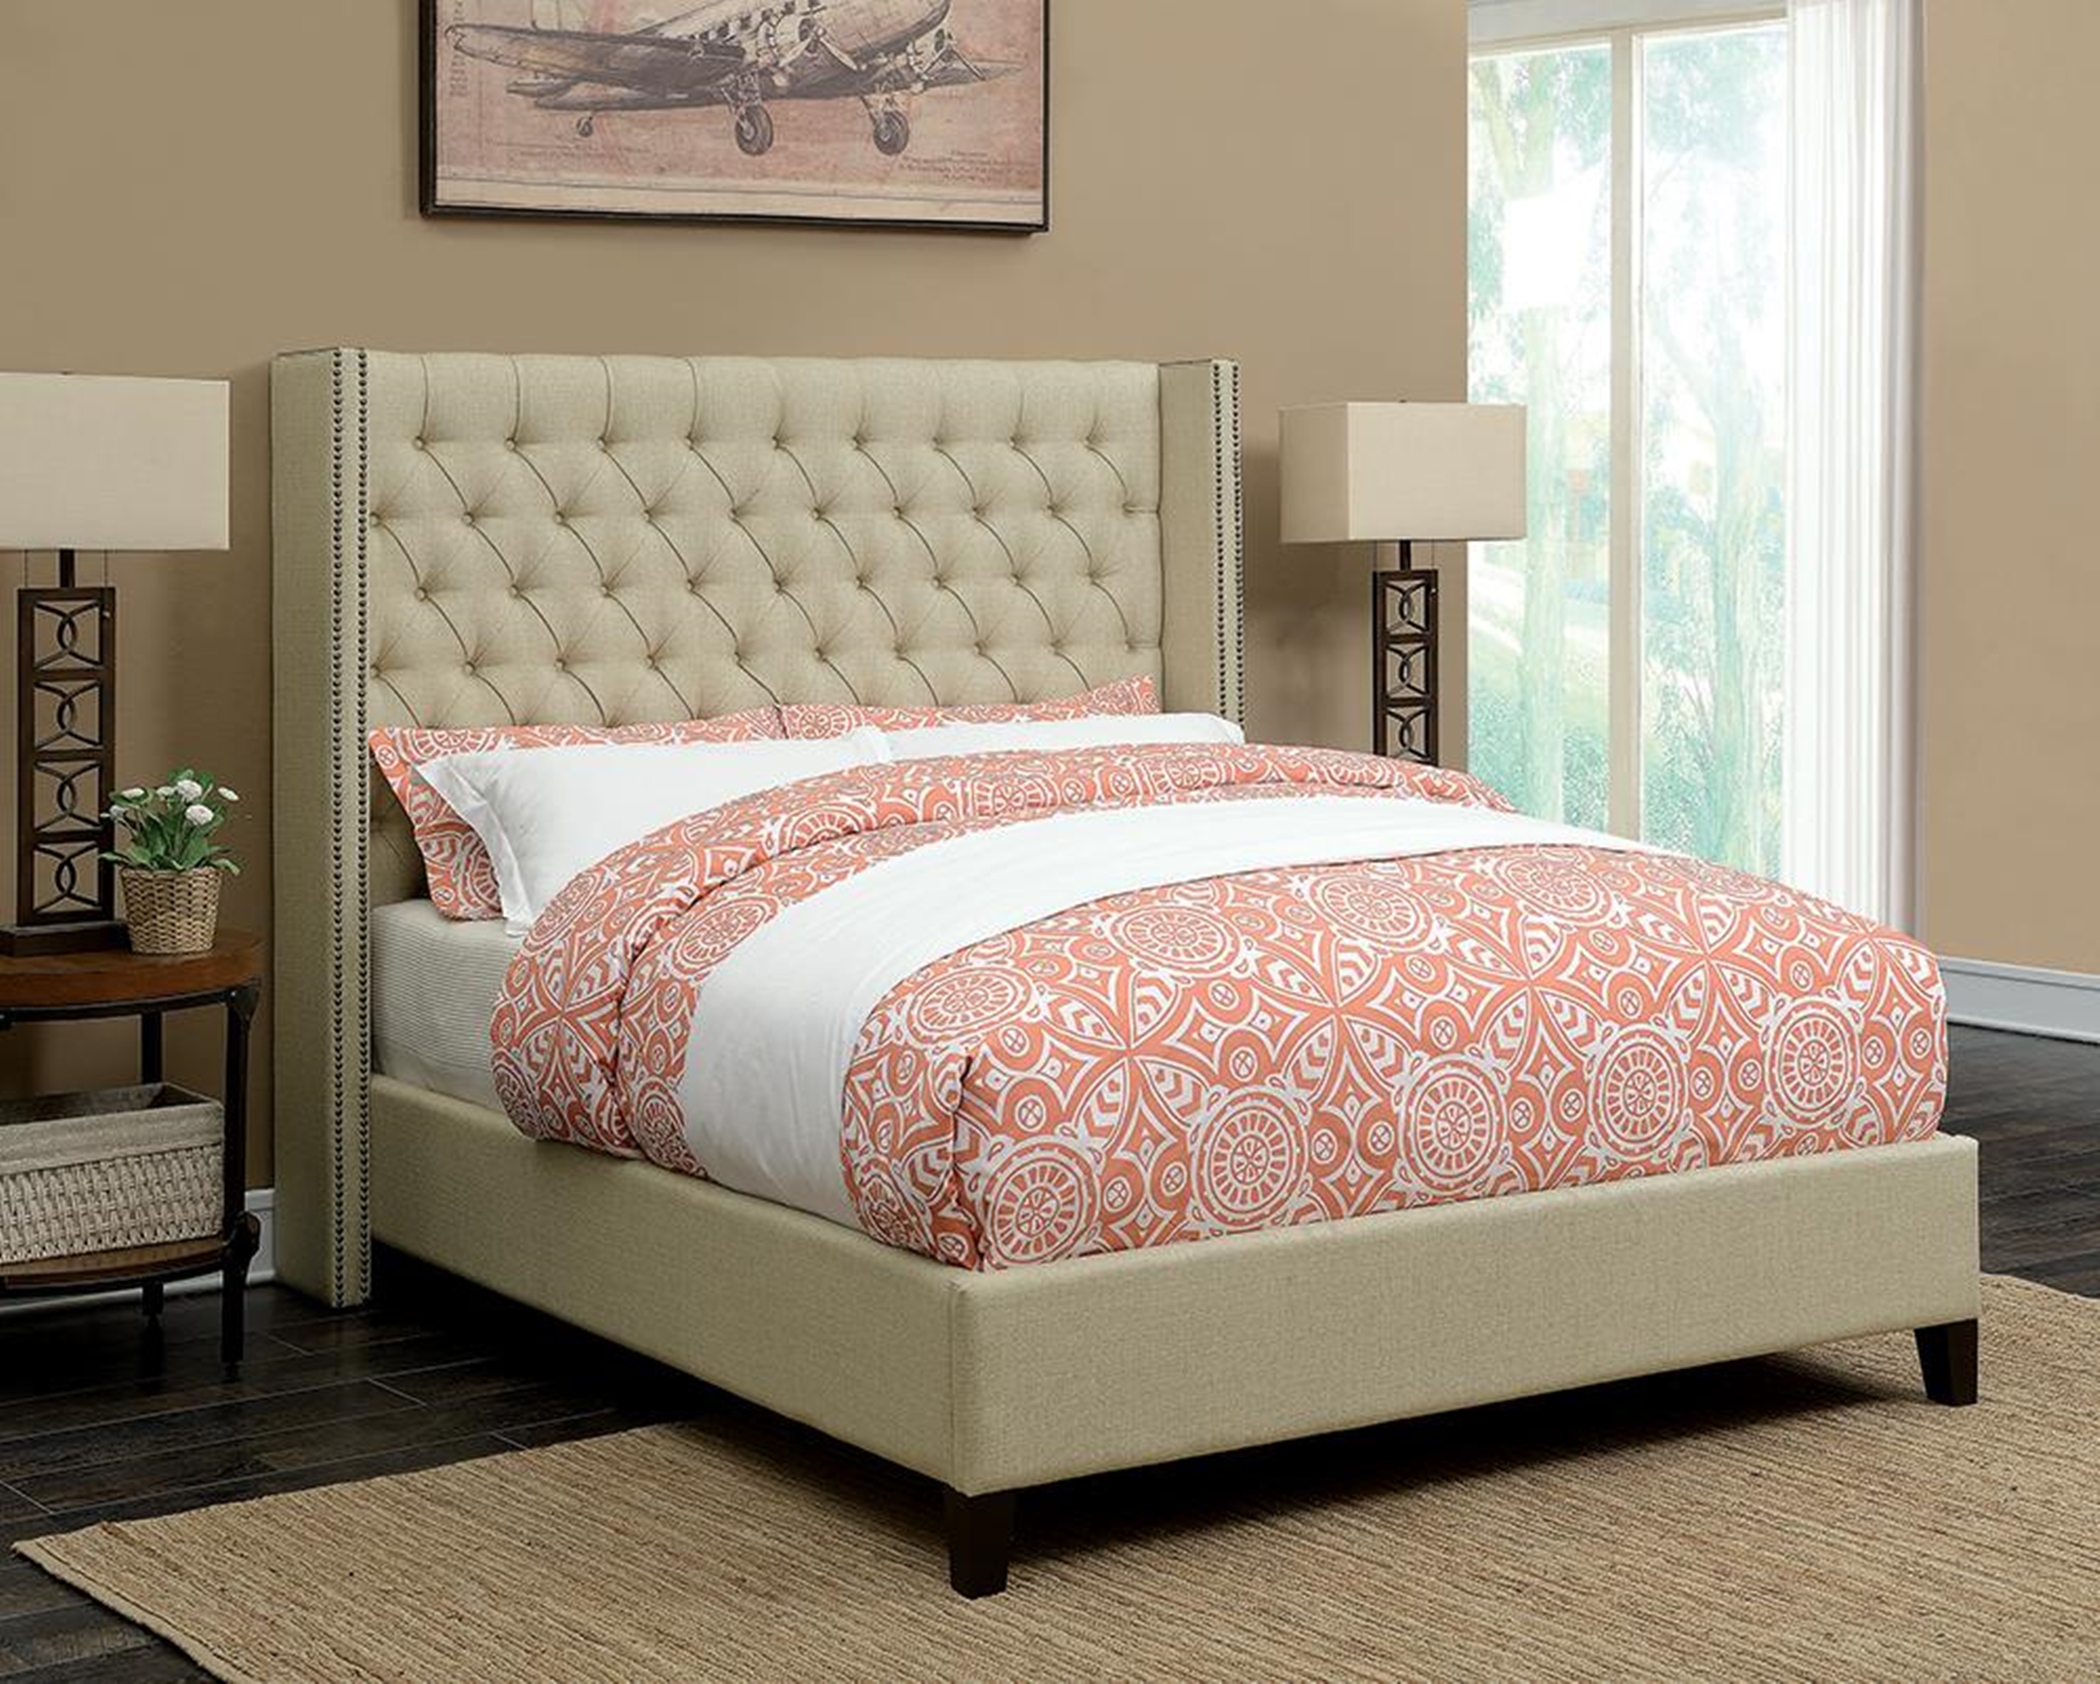 Benicia Beige Upholstered Queen Bed - Click Image to Close